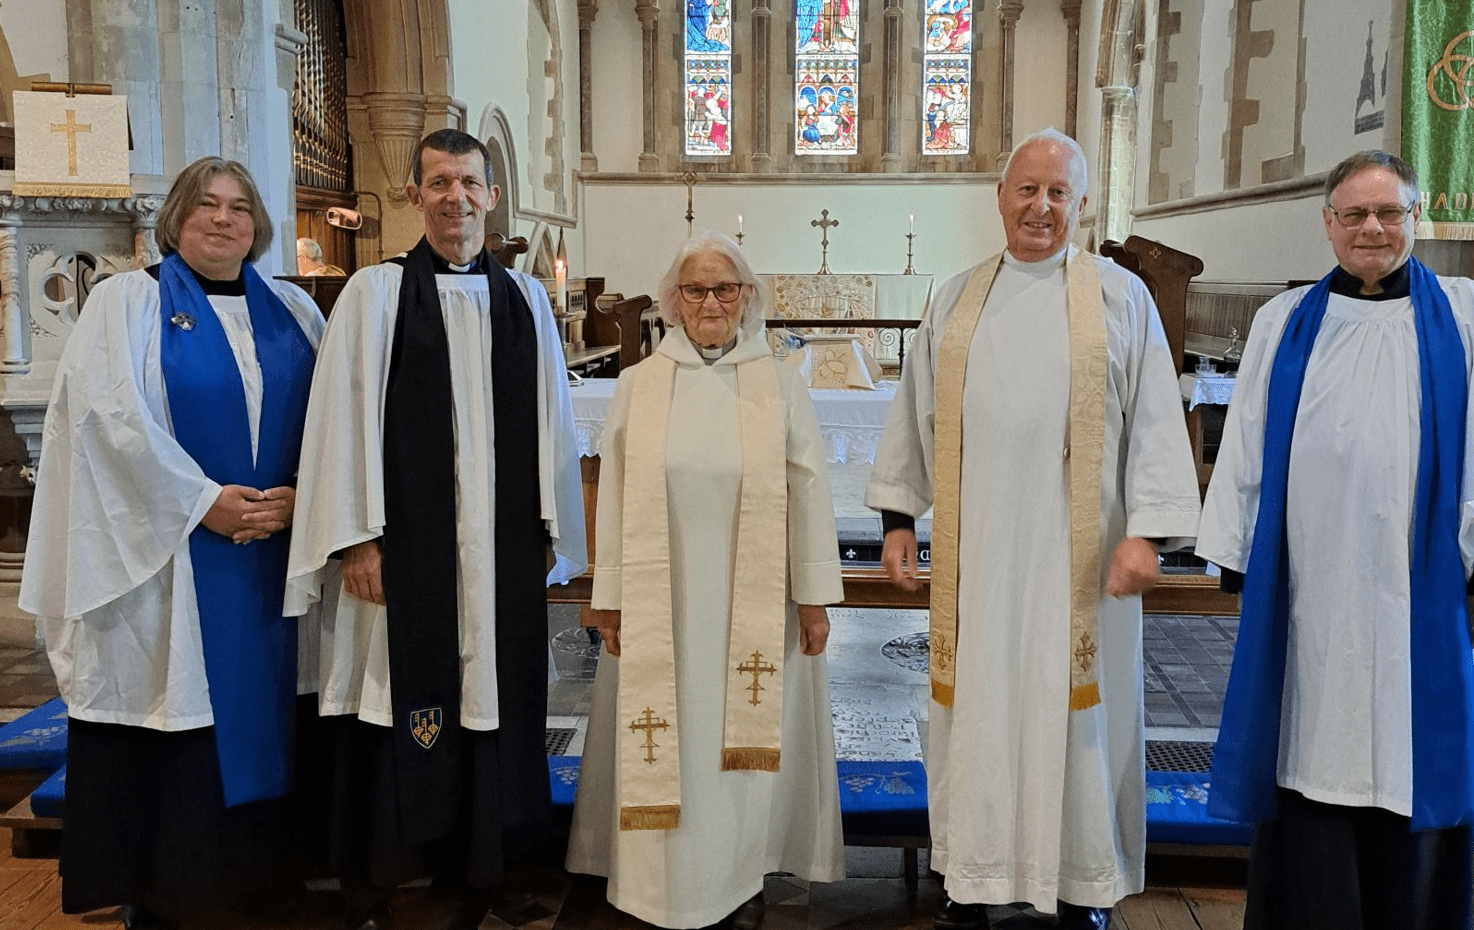 Jill Stimpson and other clergy at the celebration of her being appointed as associate priest for Haddenham, Wilburton, Witchford and Wentworth. From lefty: Katrina Myers, The Ven Richard Harlow, Rev Jill Stimpson, Rev Canon Mark Haworth and David Ogilvie.